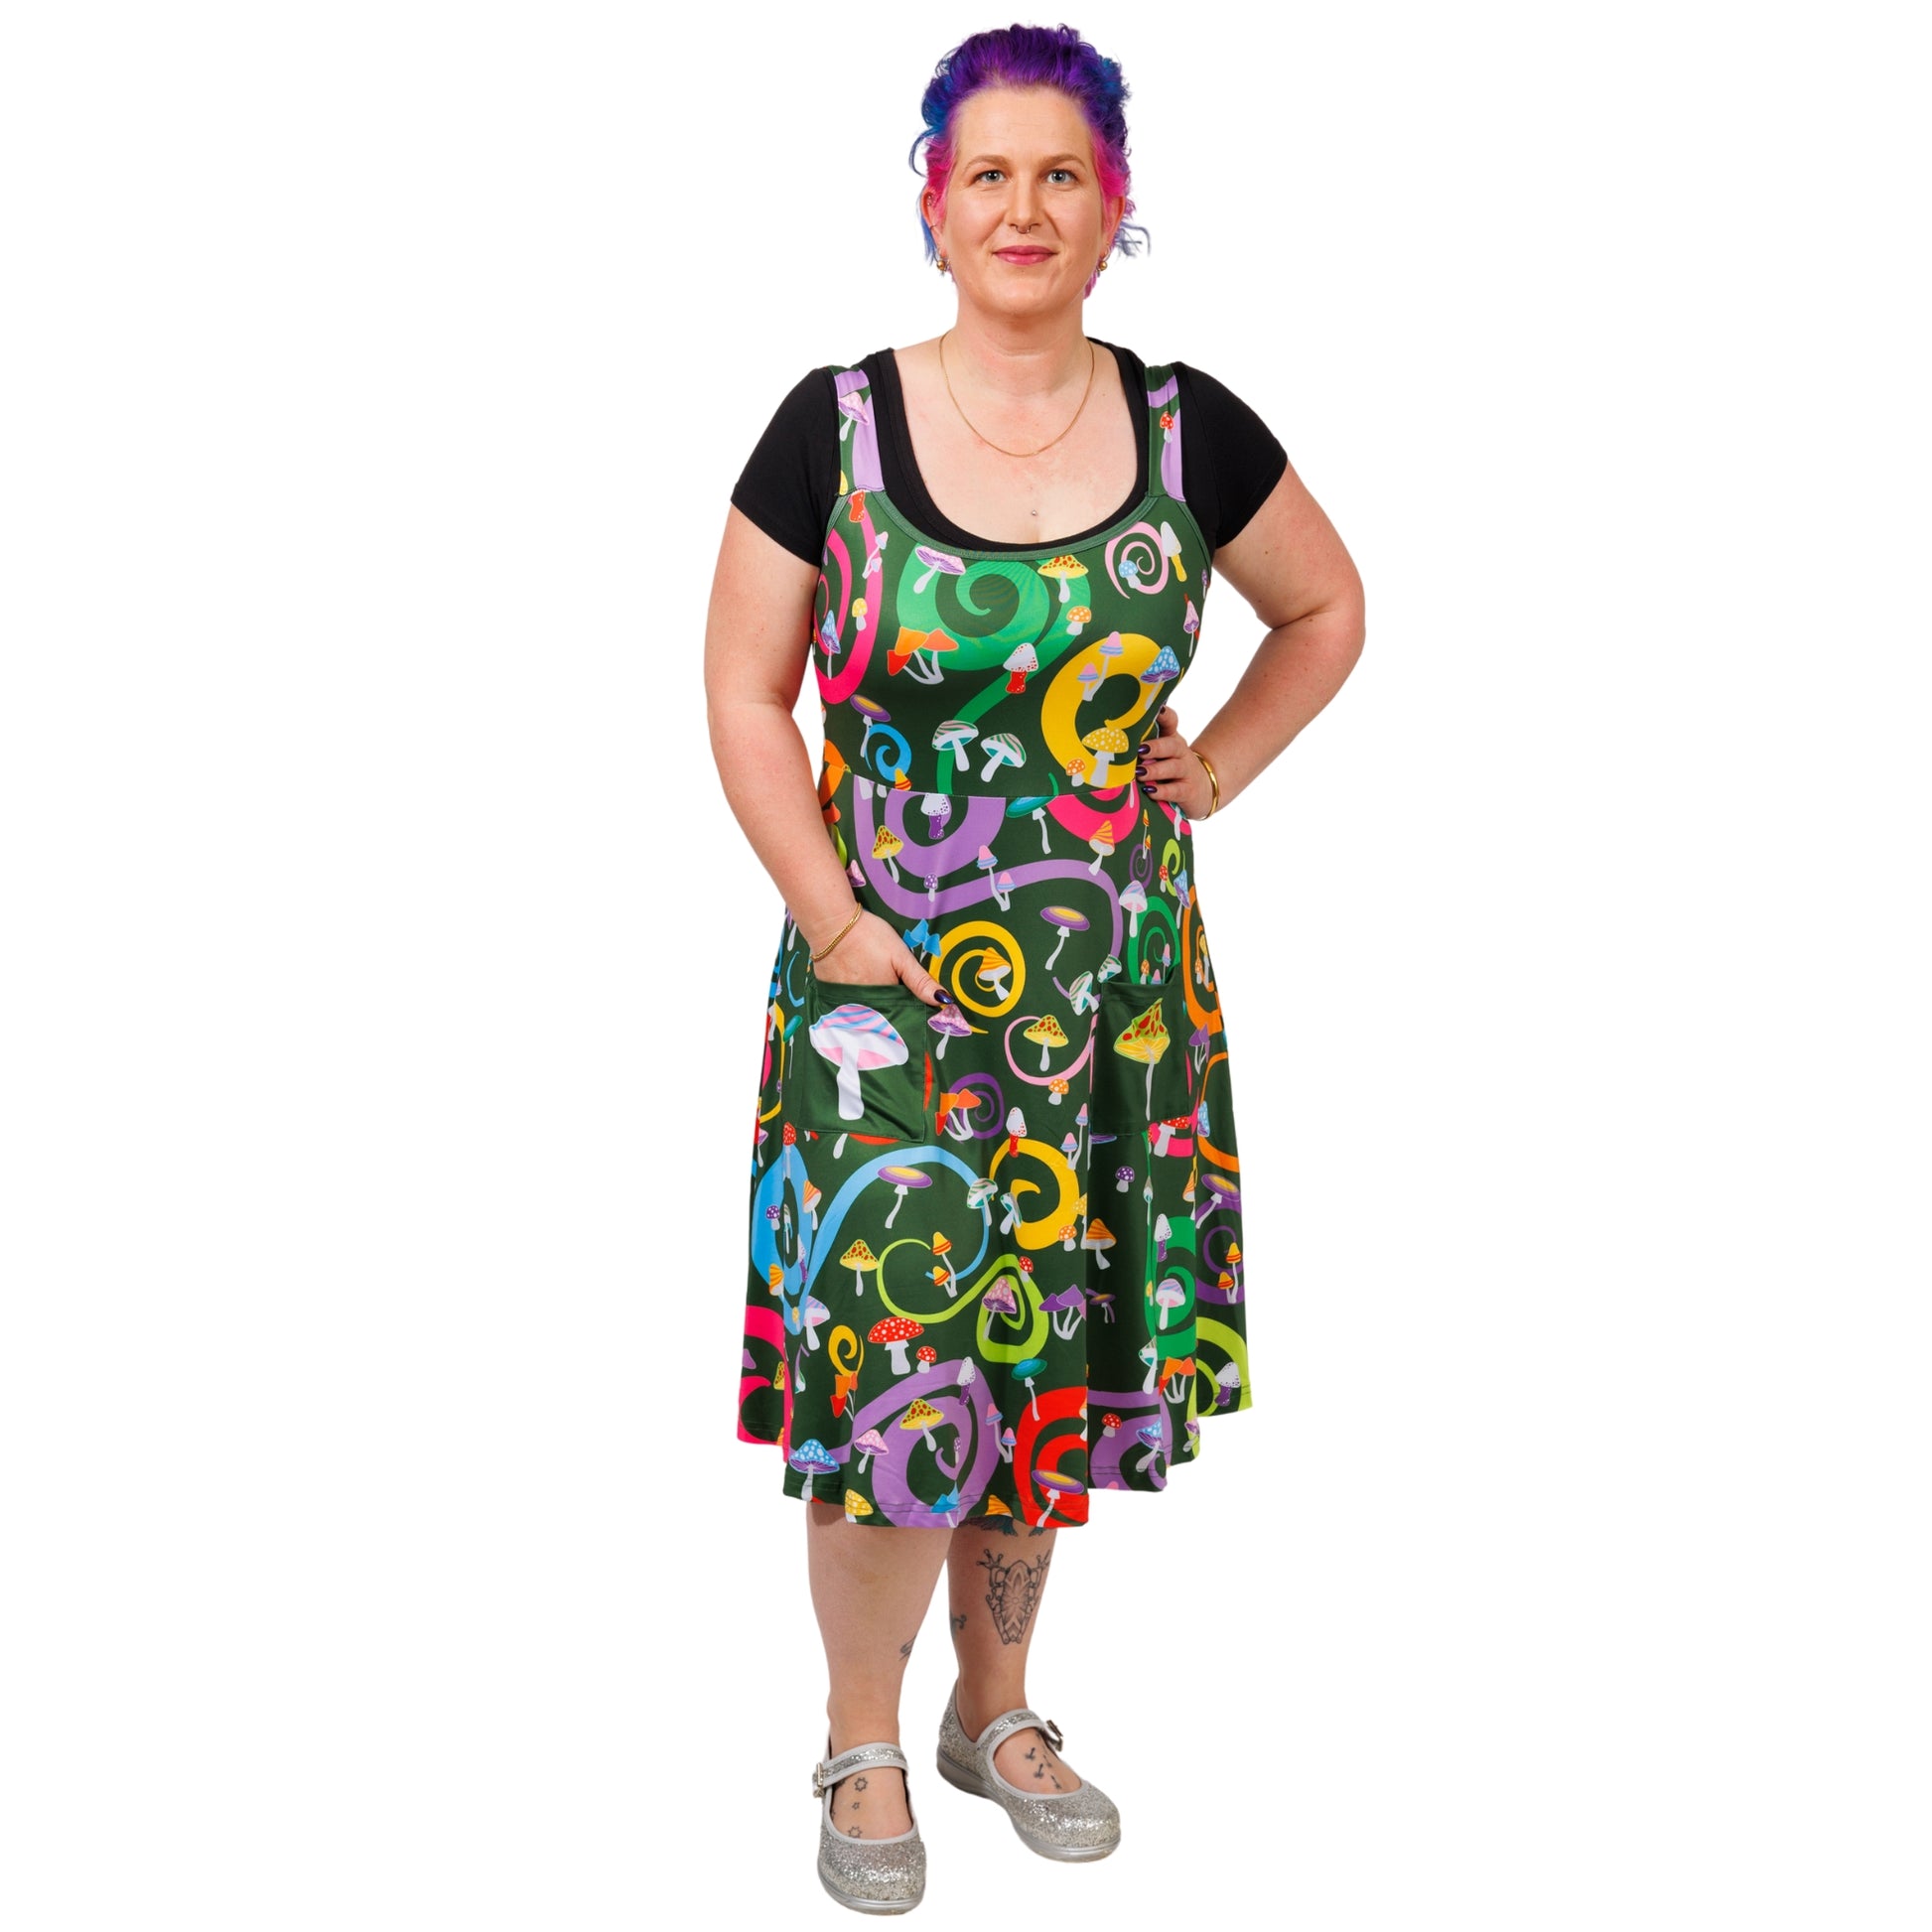 Toadstool Pinafore by RainbowsAndFairies.com.au (Mushroom - Psychedelic Swirl - Woodstock - Vintage Inspired - Dress With Pockets) - SKU: CL_PFORE_TOADS_ORG - Pic-01